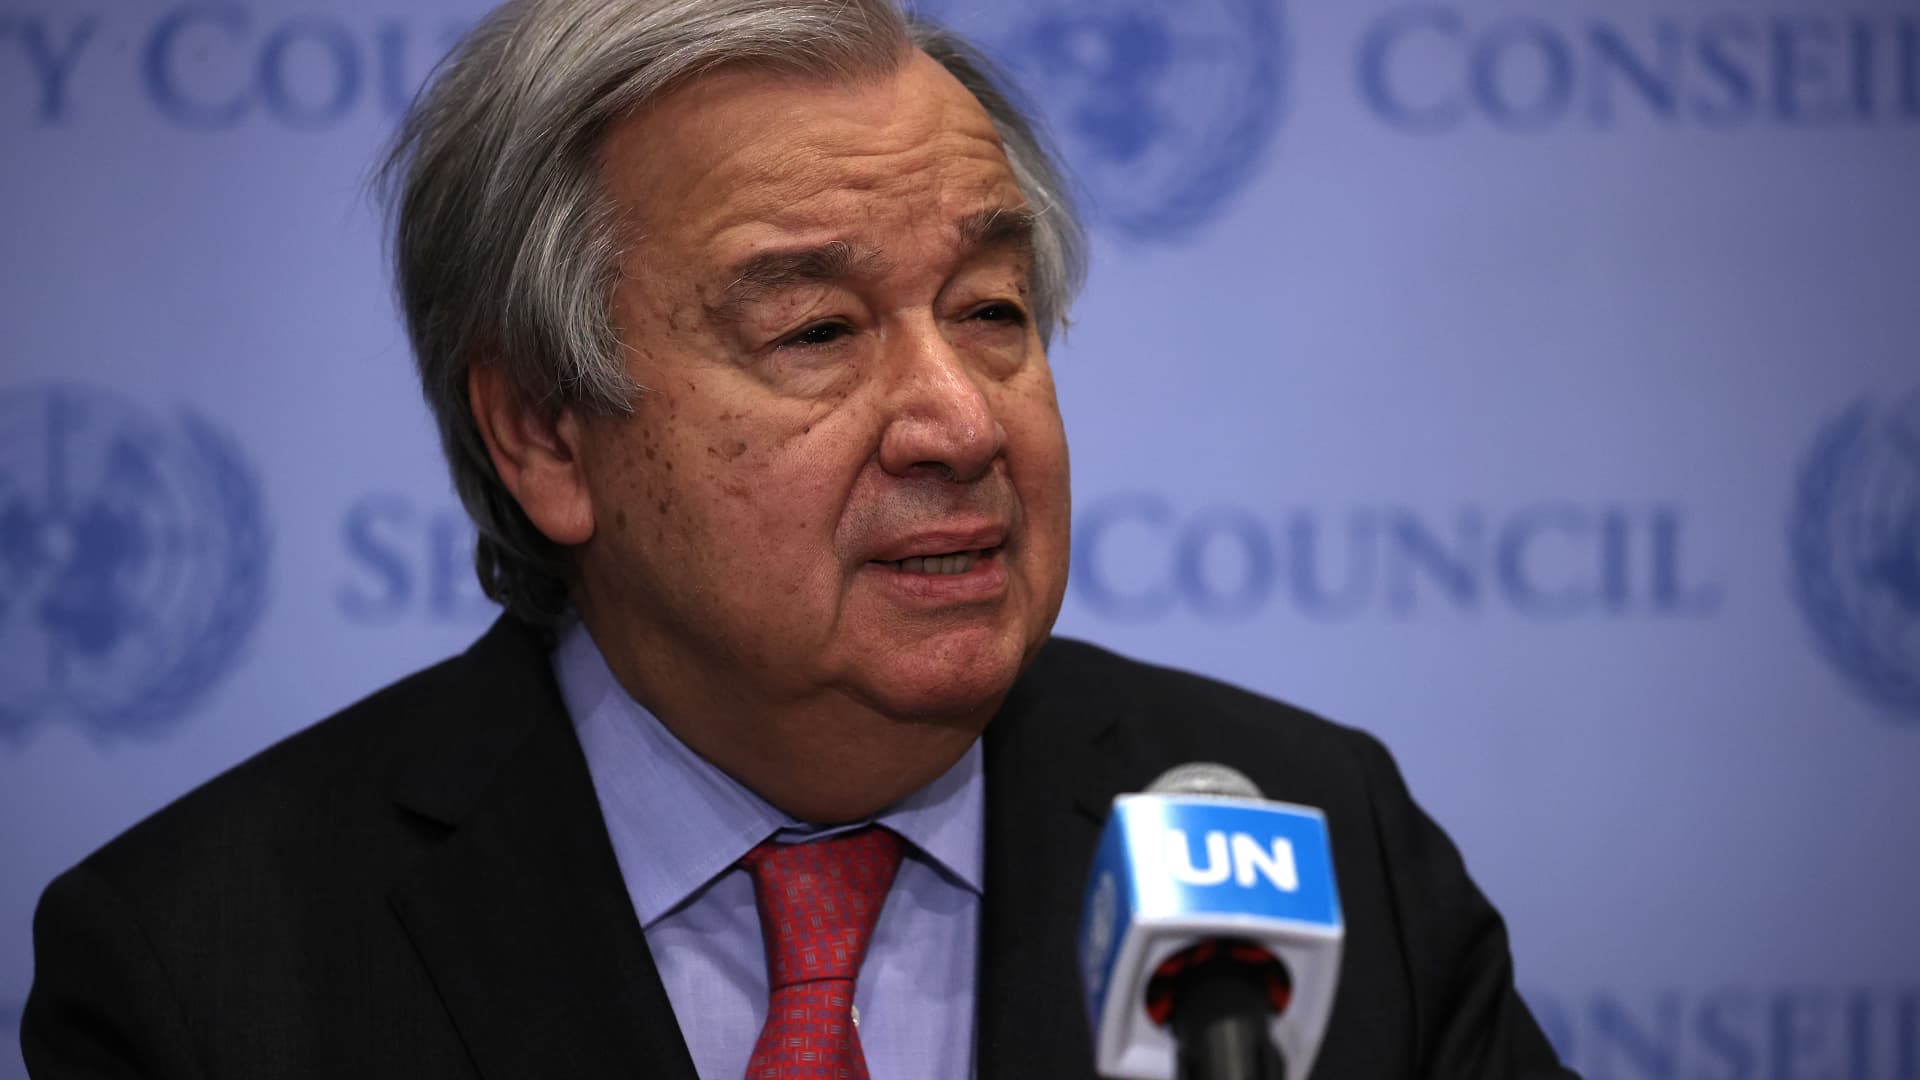 Secretary-General of the United Nations Antonio Guterres speaks to press about war in Ukraine at the Security Council Stakeout of UN headquarters in New York City, United States on March 14, 2022.